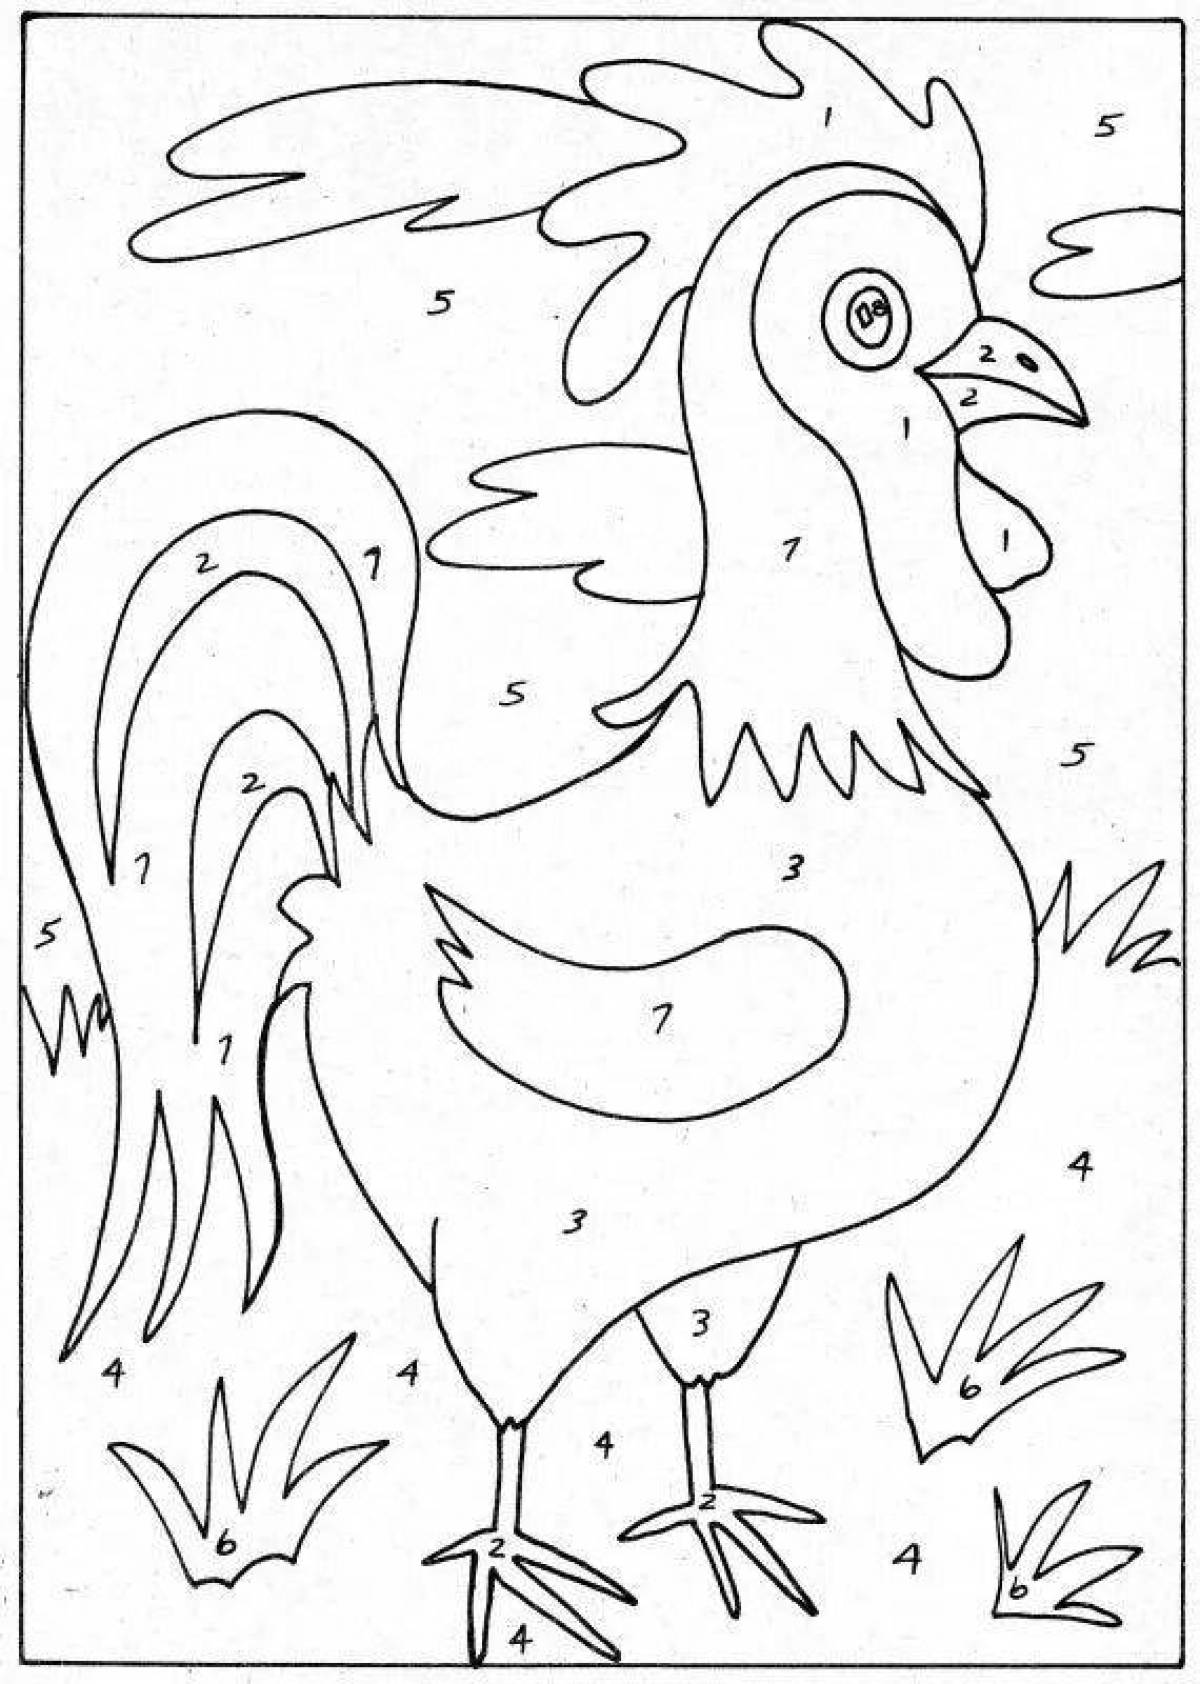 Rooster by numbers #3